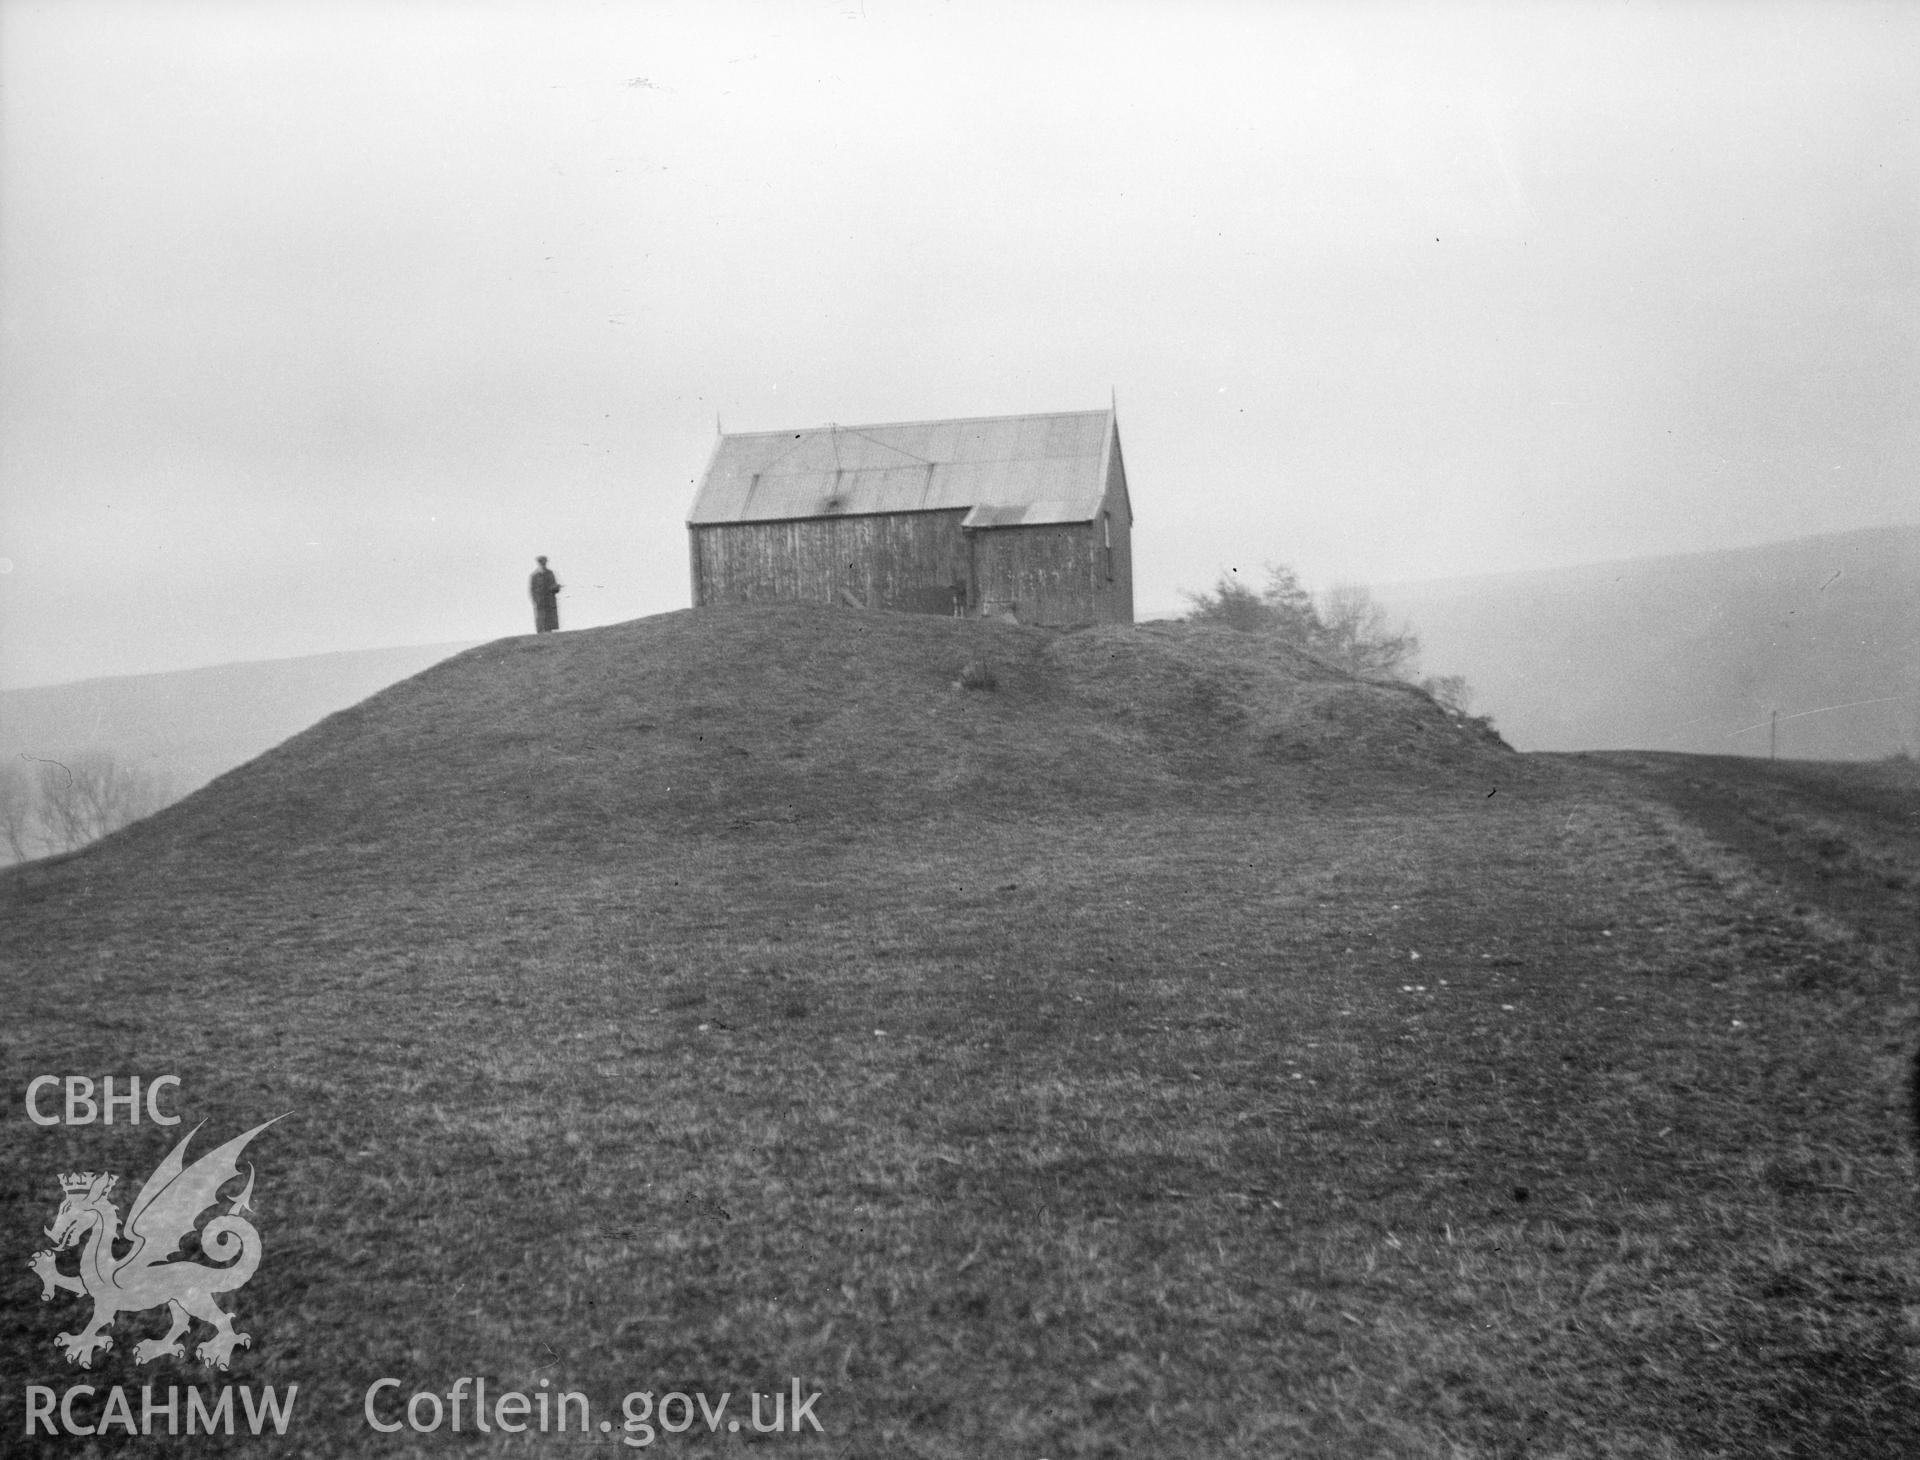 Digital copy of a nitrate negative labelled view of Rhiwian tumulus taken in 1921 (probaly mis-labelled)